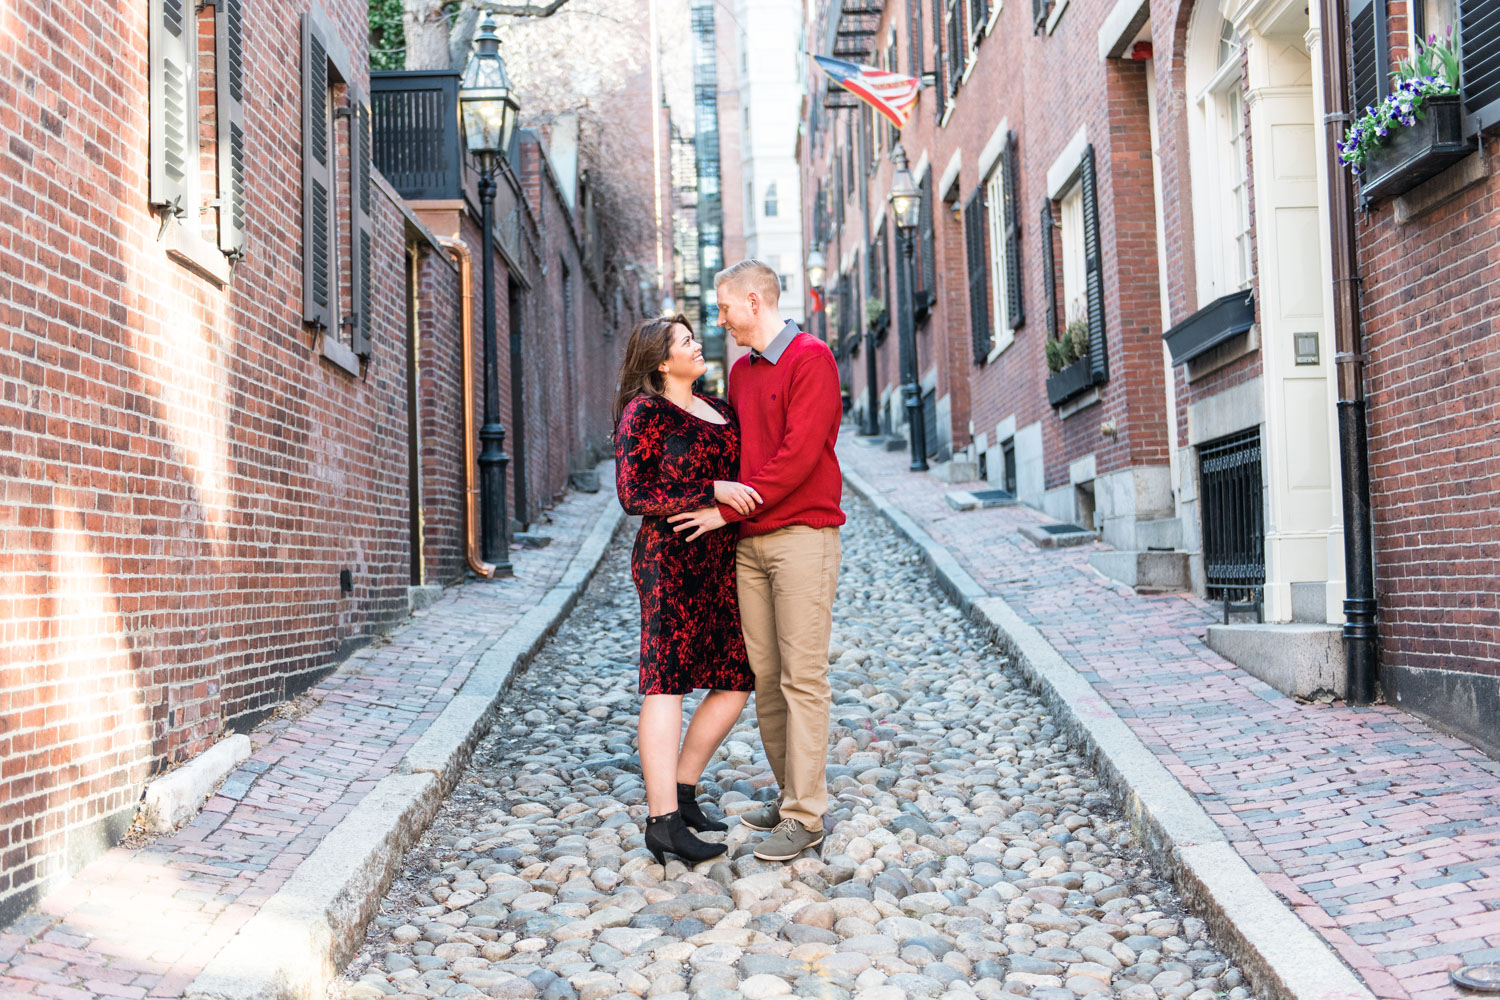 Andrea + Scott | Dog Lovers Beacon Hill Formal Spring Sunrise Creative Organic Romantic Engagement Session | Boston and New England Engagement Photography | Lorna Stell Photo